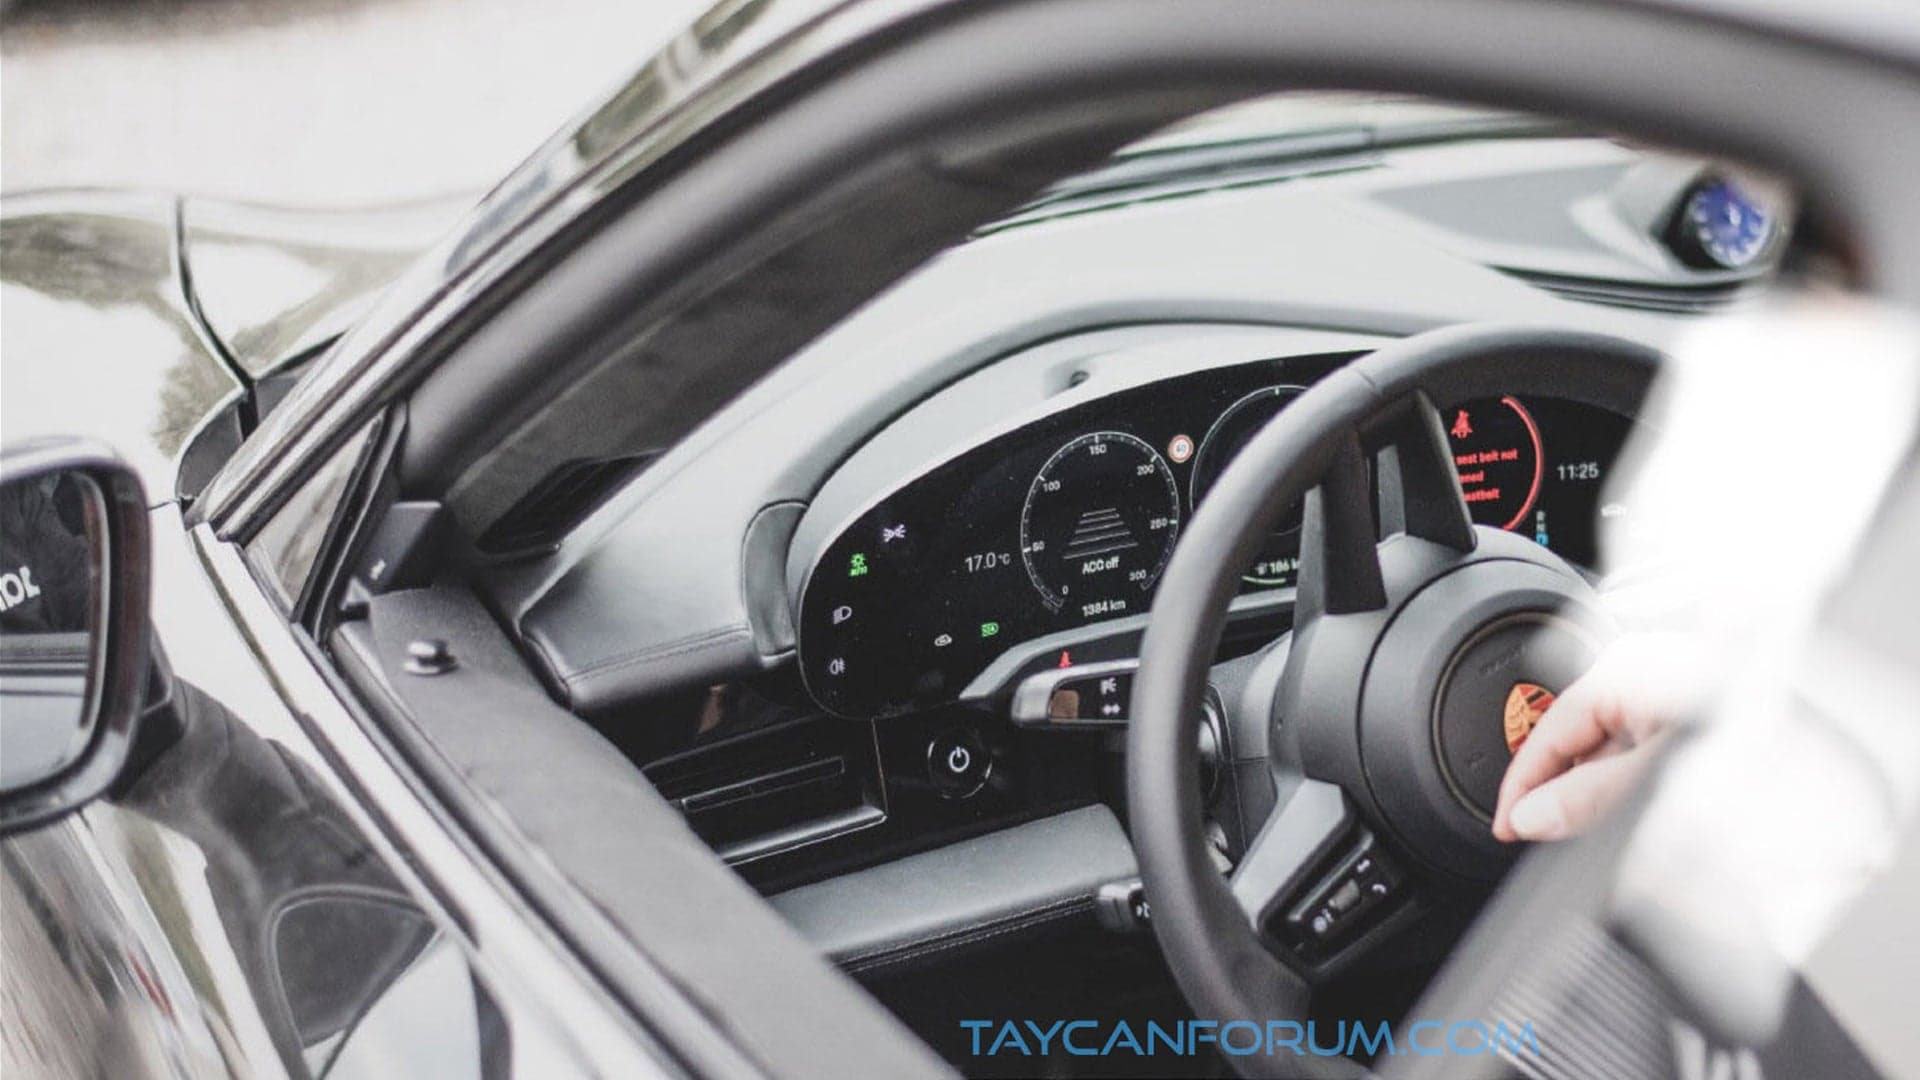 Spy Shots Reveal First Look at 2020 Porsche Taycan’s Production Interior